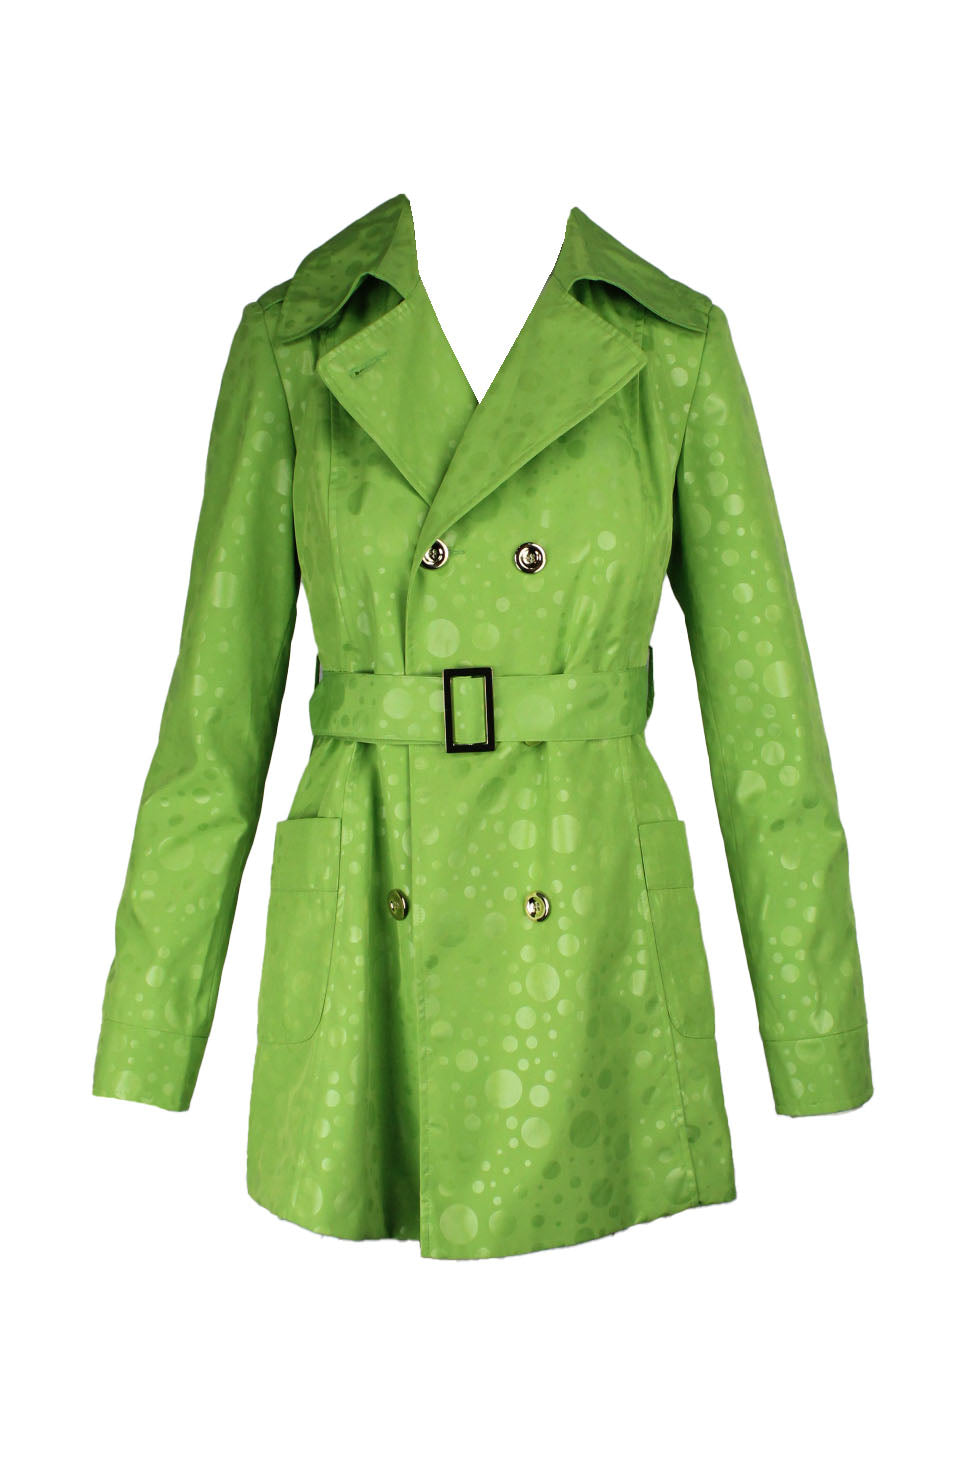 description: vintage jheri richards rainwear green polka dot jacquard jacket. features double breasted button closure at center front, two slit pockets at sides, and tonal belt at waist. 